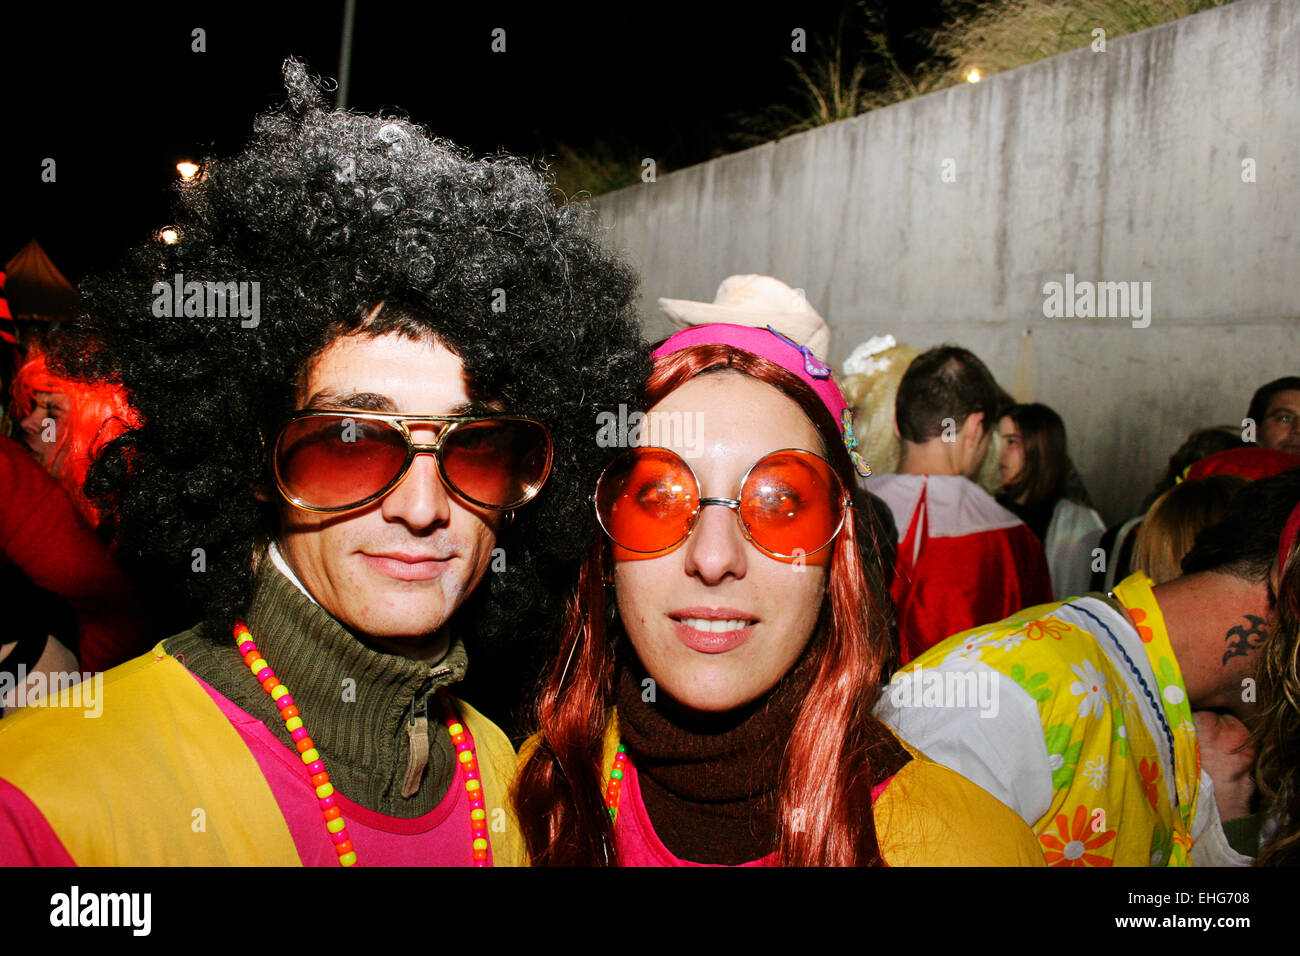 Hippy couple at the Pego festival Spain. Stock Photo